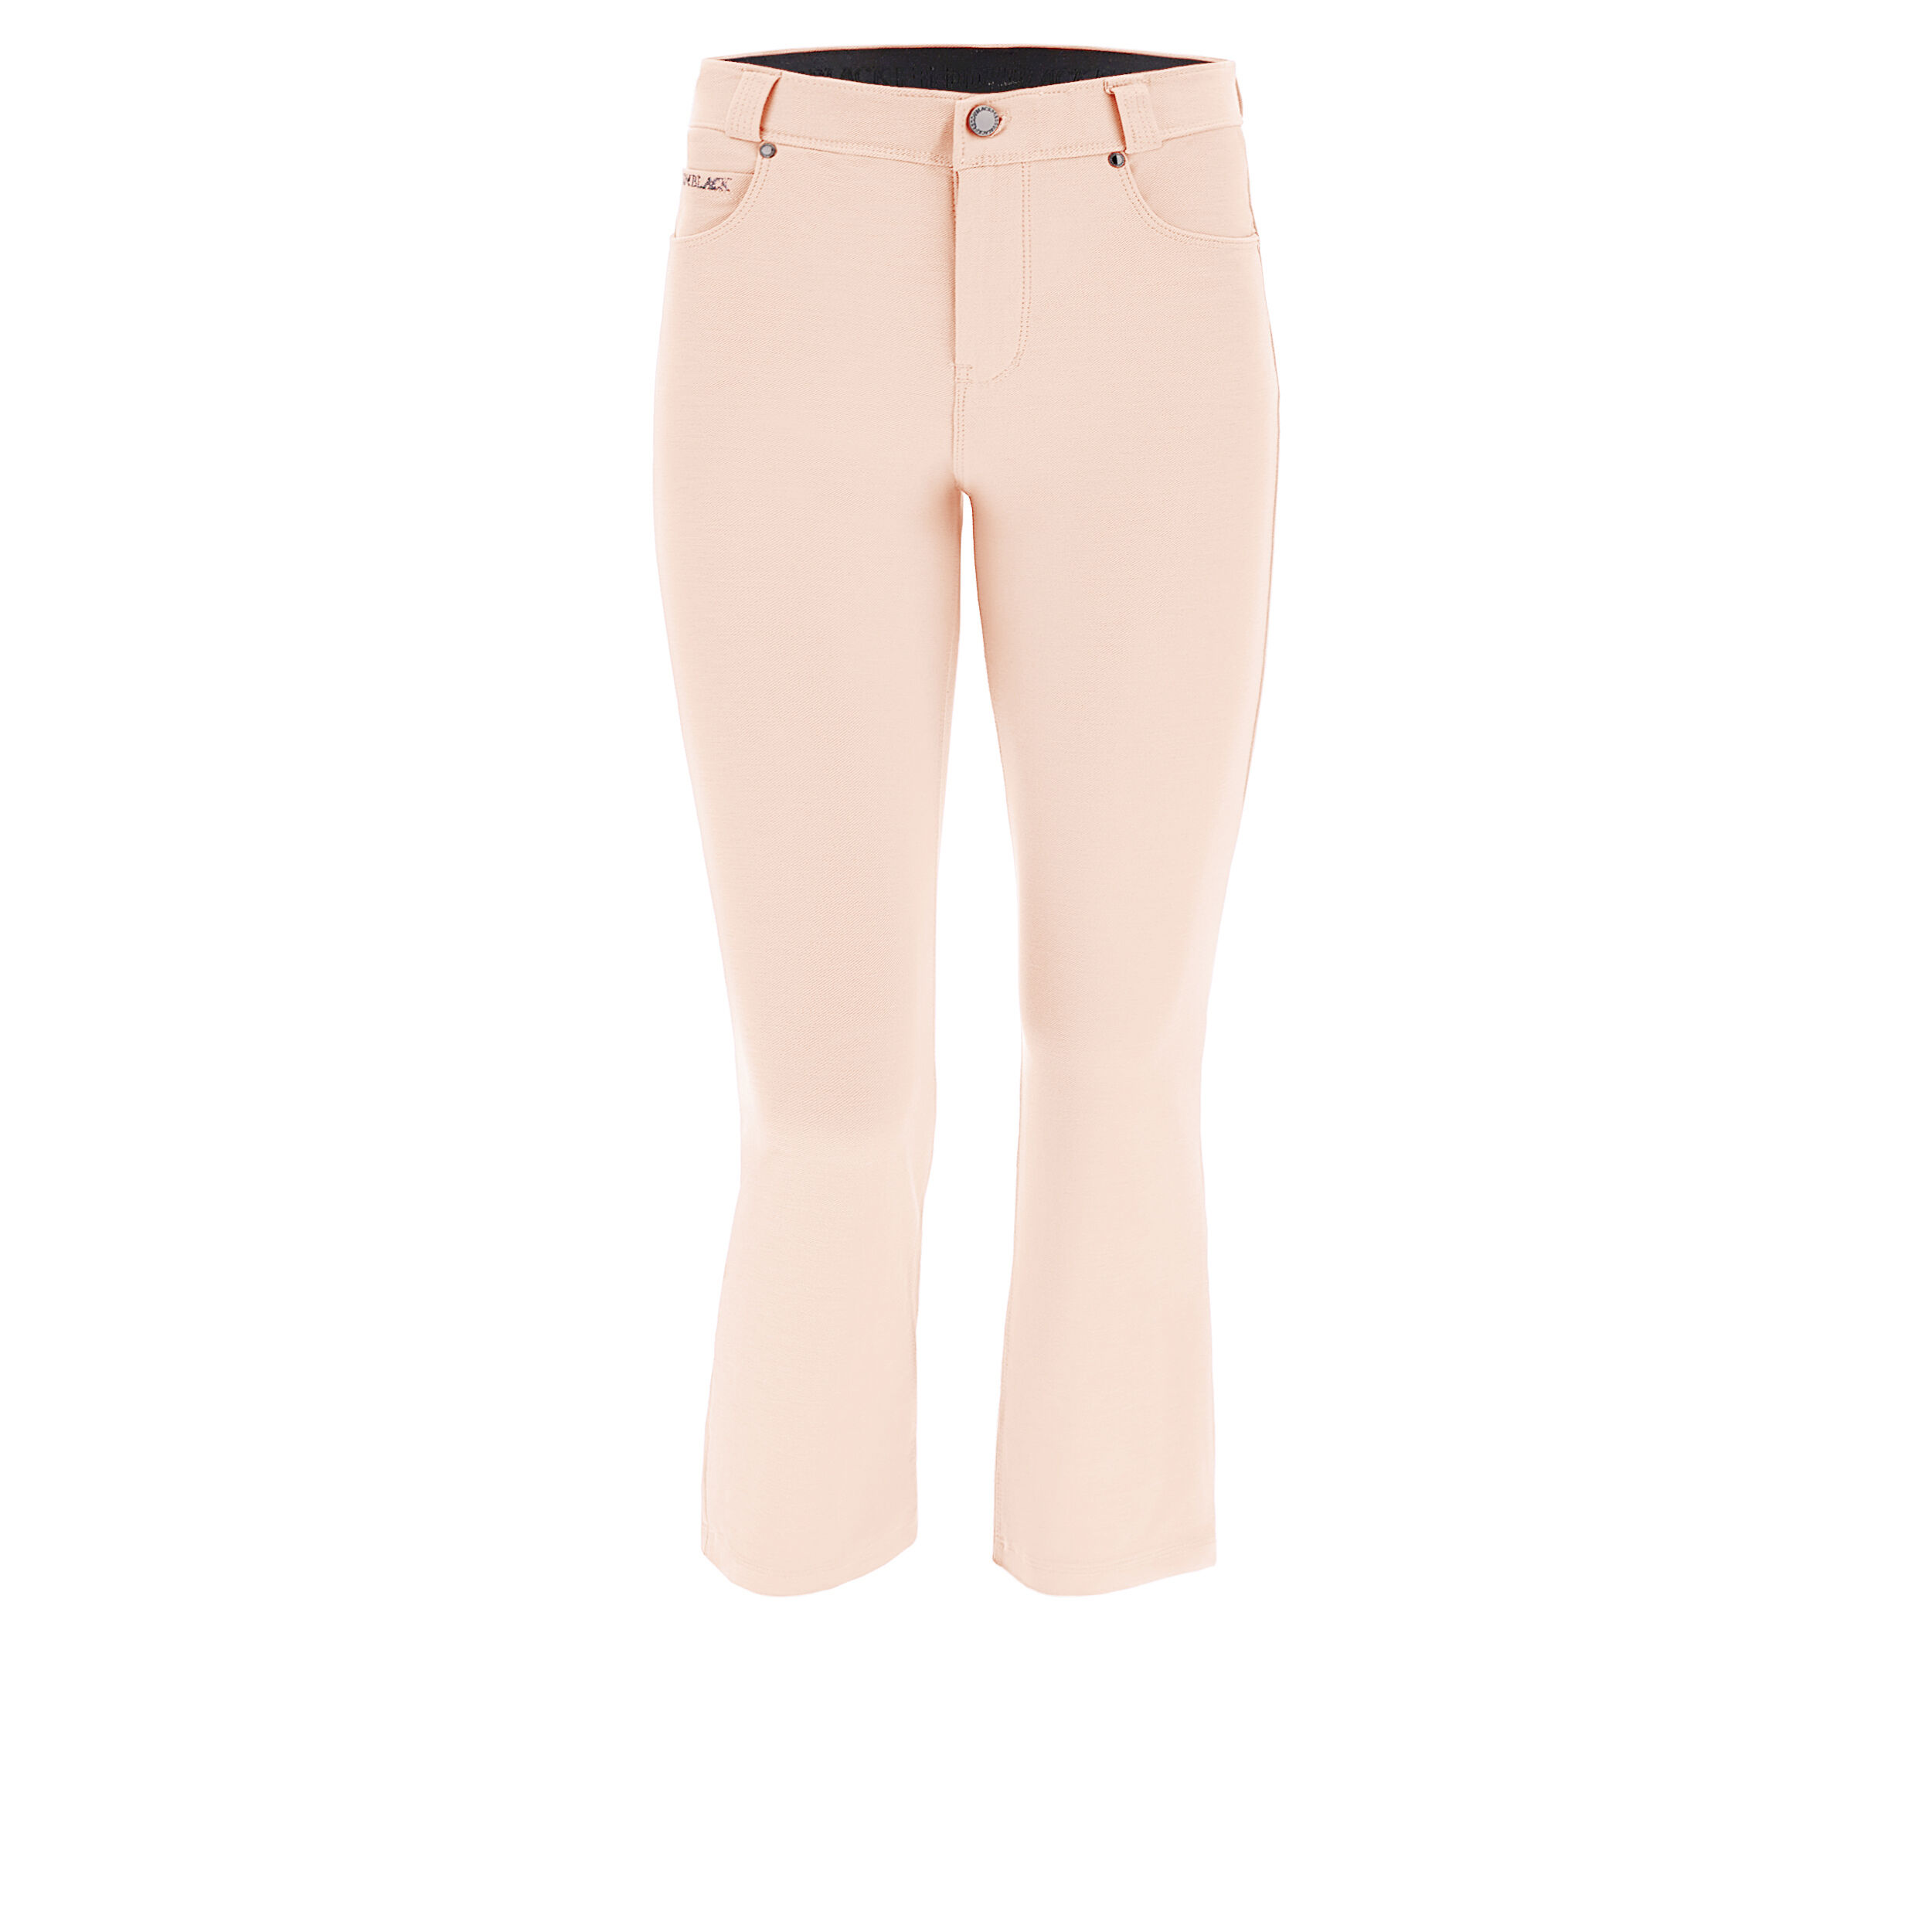 Freddy Pantaloni cropped in jersey drill colorato Peachy Keen Donna Extra Small